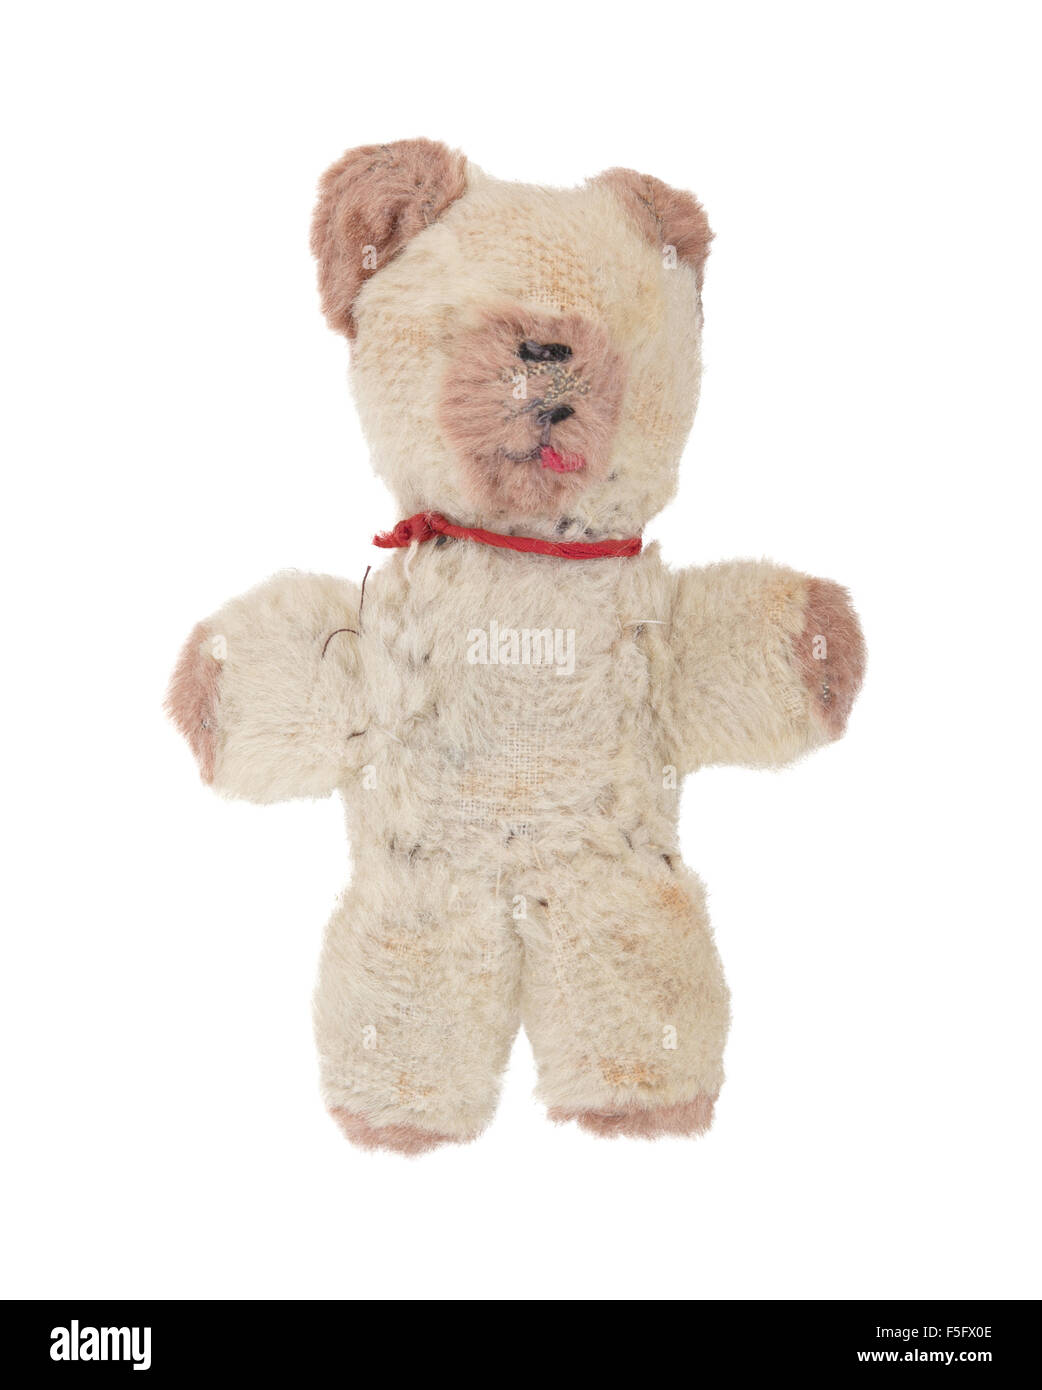 Teddy bear isolated on a white background Stock Photo